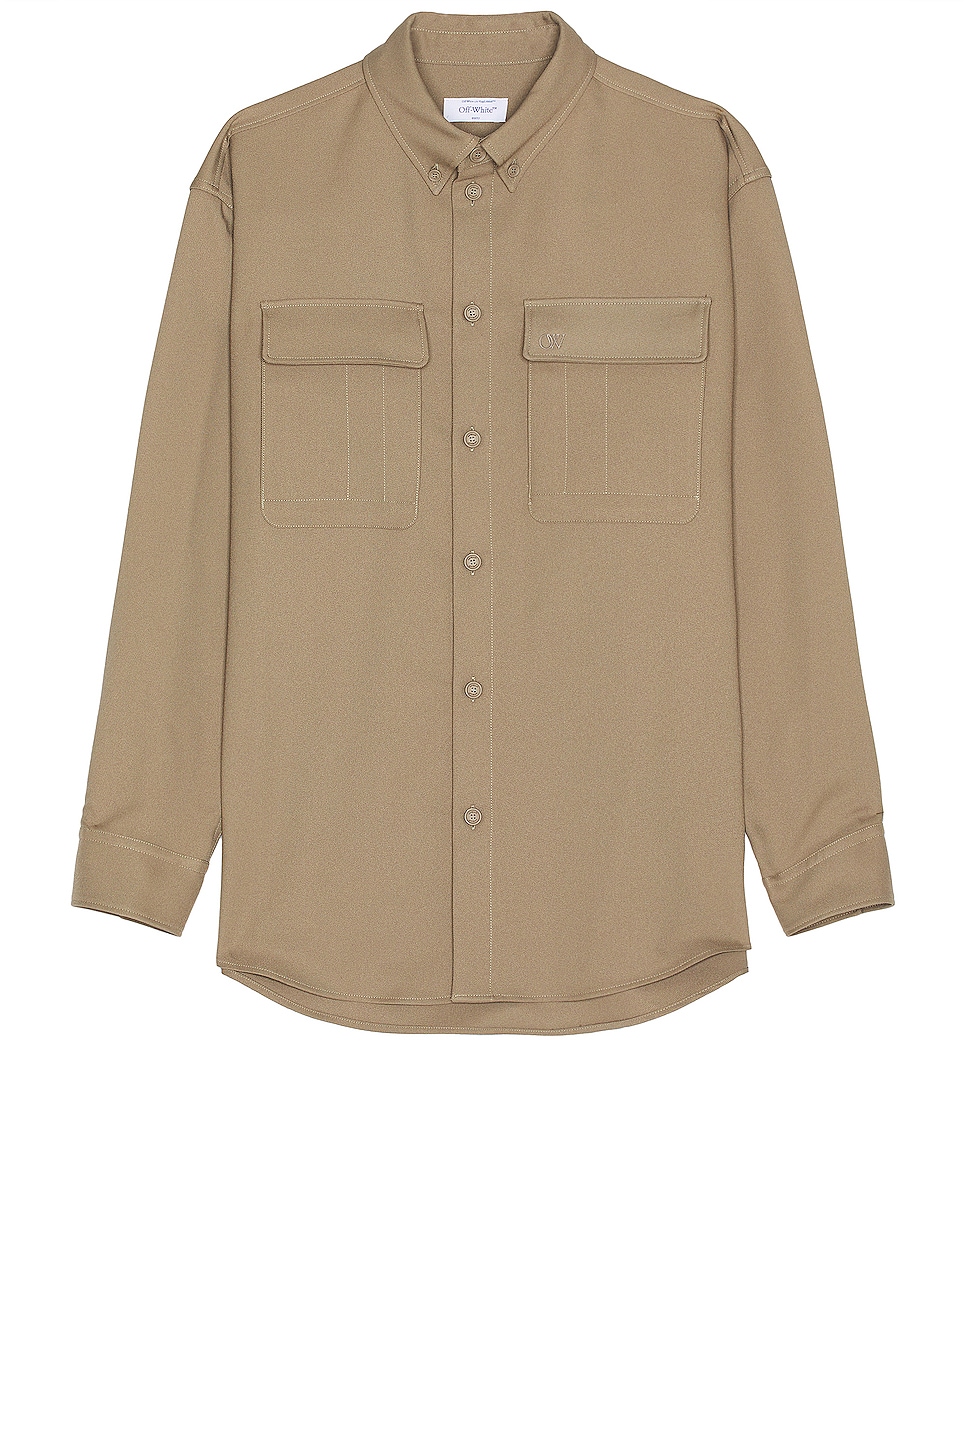 Image 1 of OFF-WHITE Drill Military Overshirt in Beige